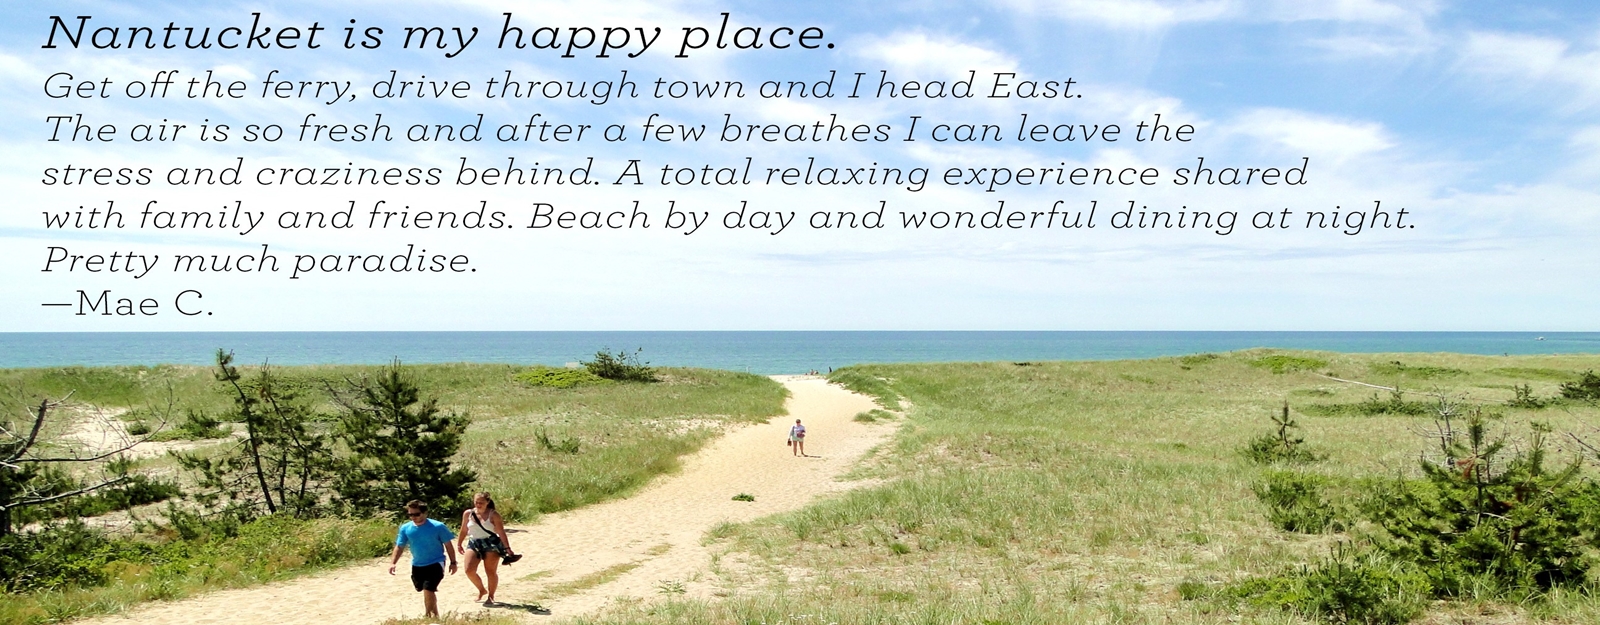 Here are a few quotes from people who love to Get Back to Nantucket. Why do you plan to get back?